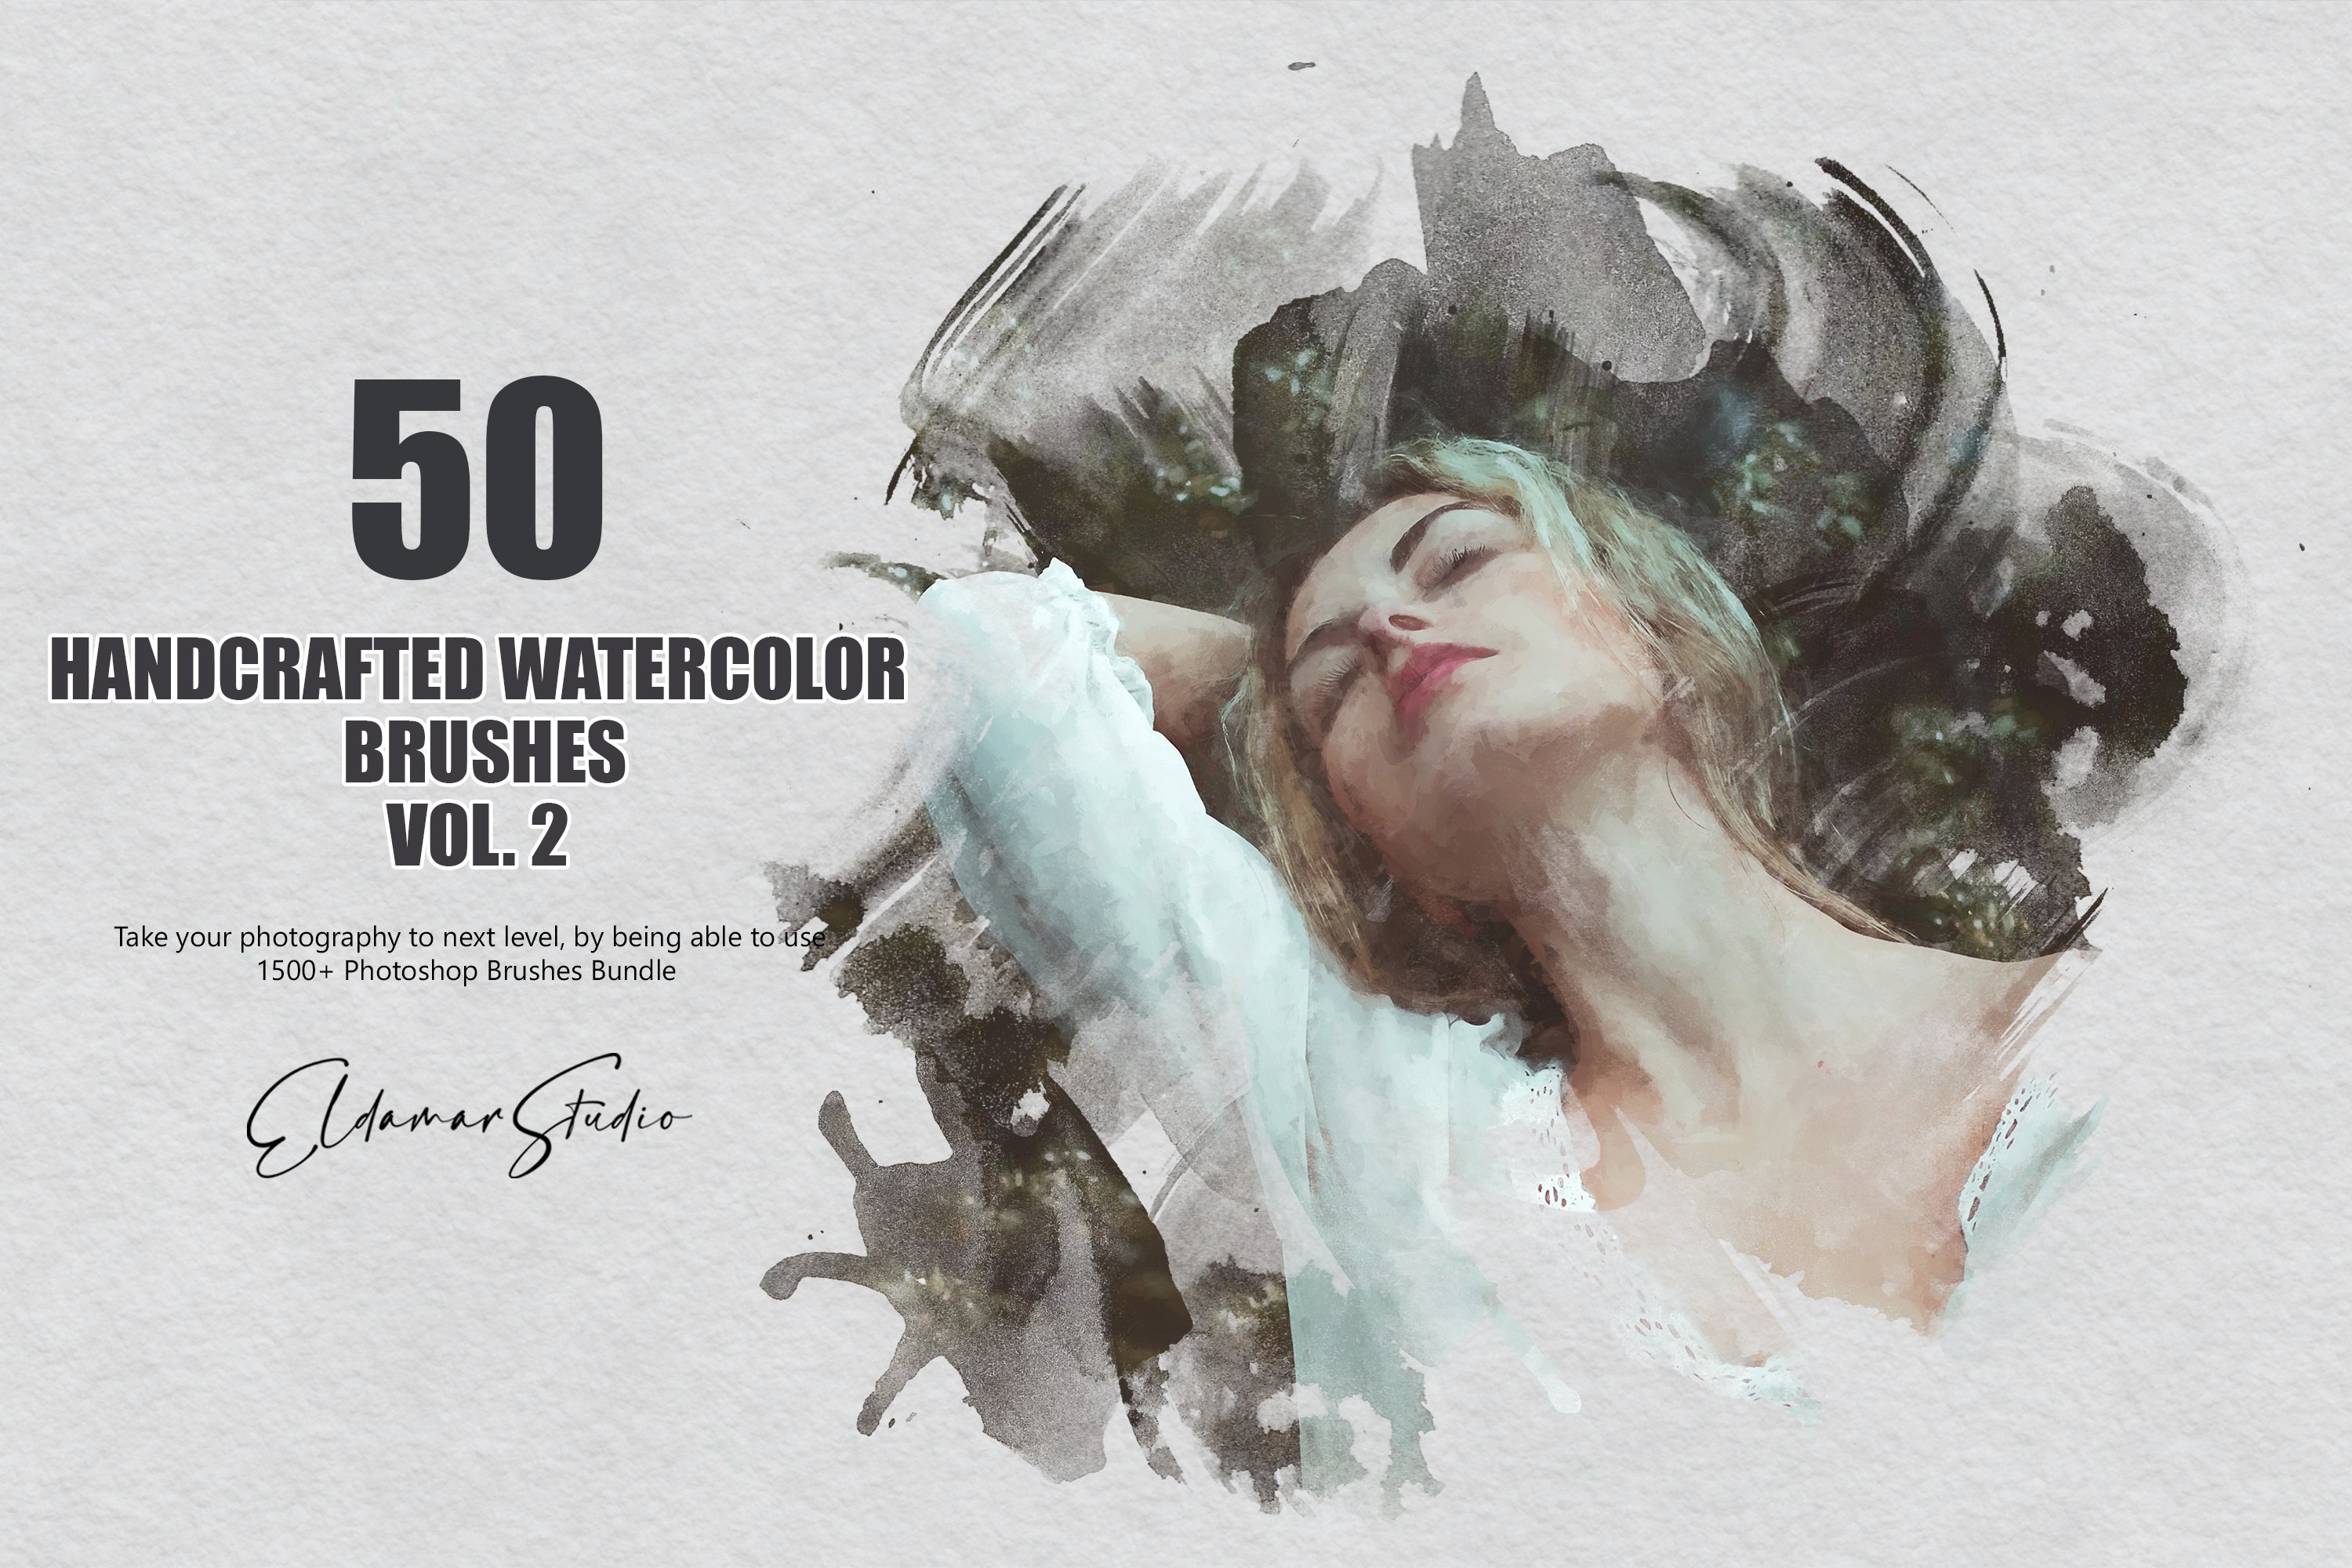 50 Handcrafted Watercolor Brushes 2cover image.